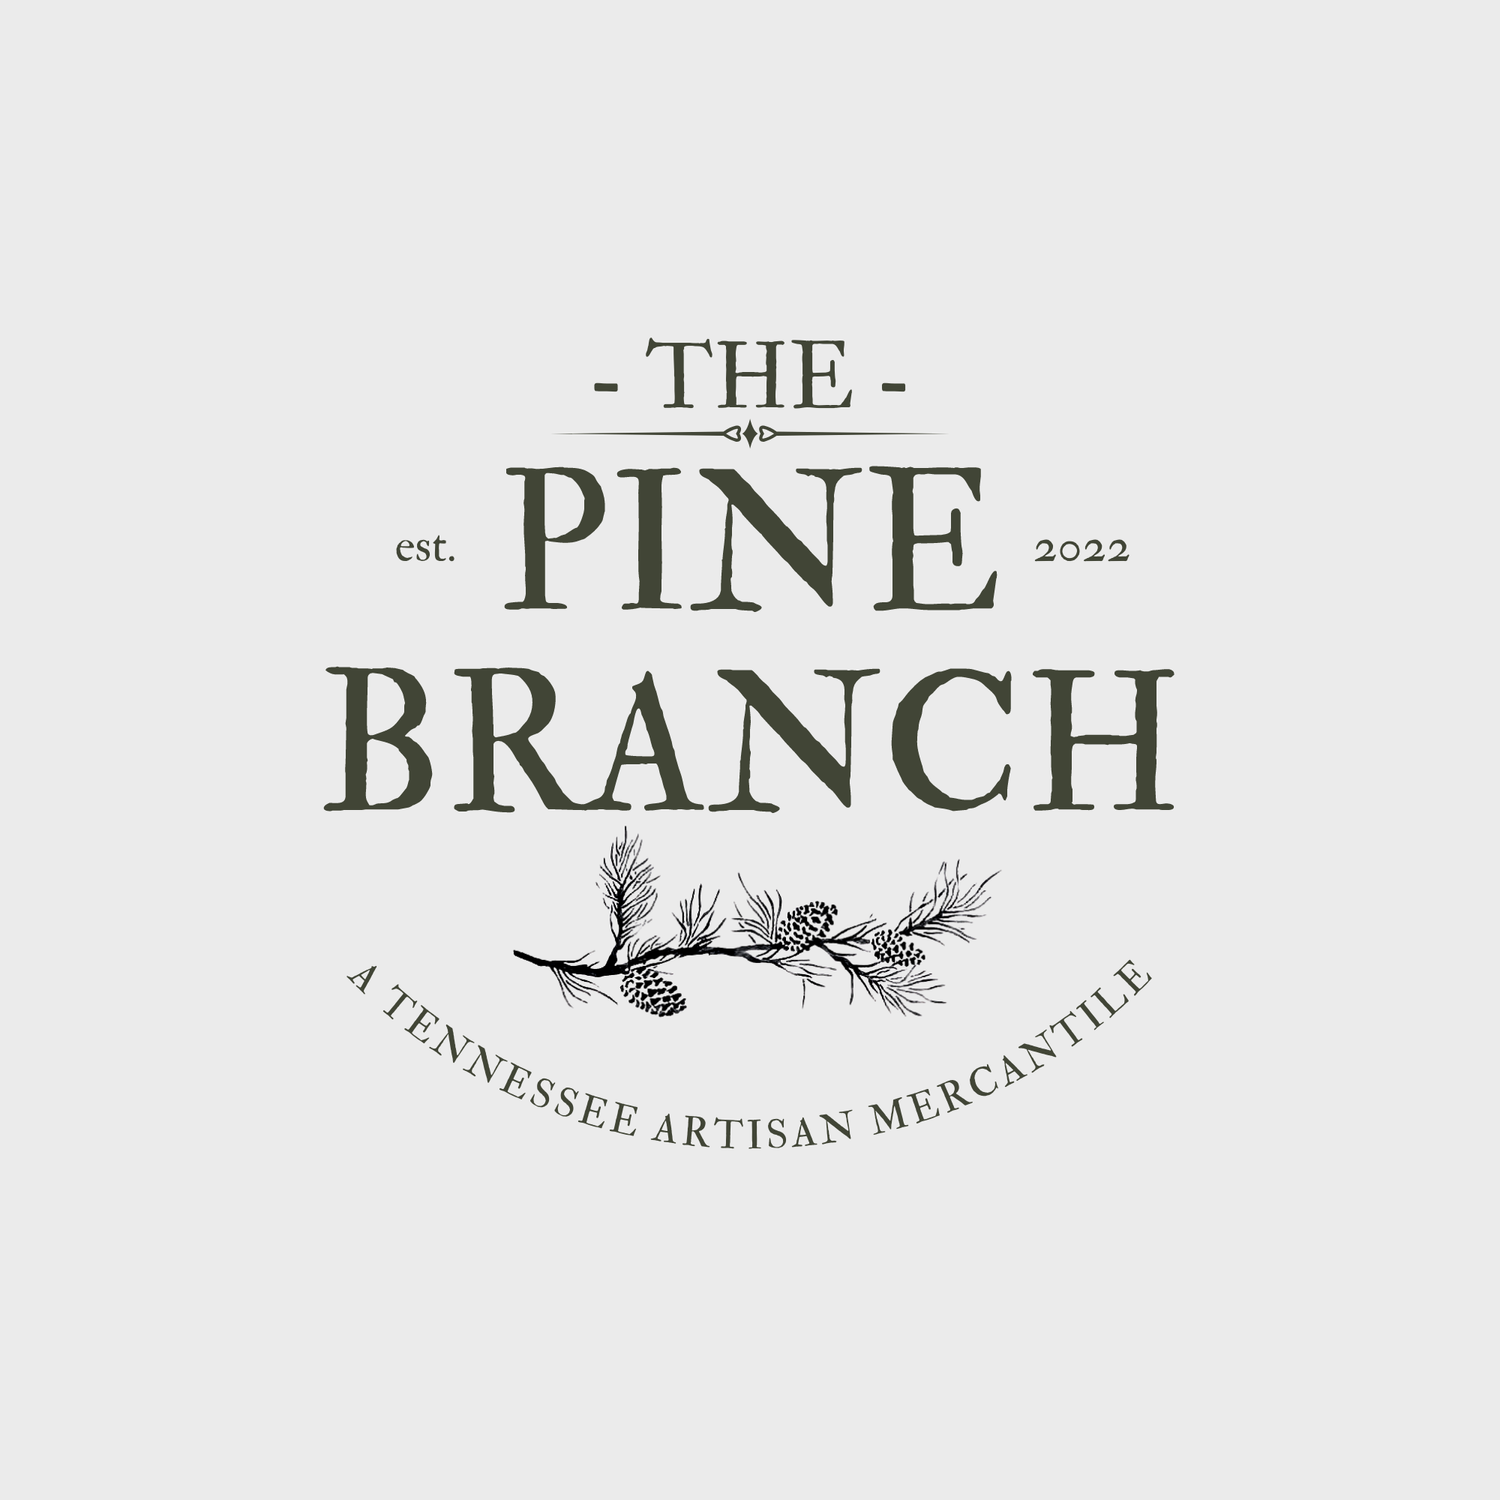 The Pine Branch